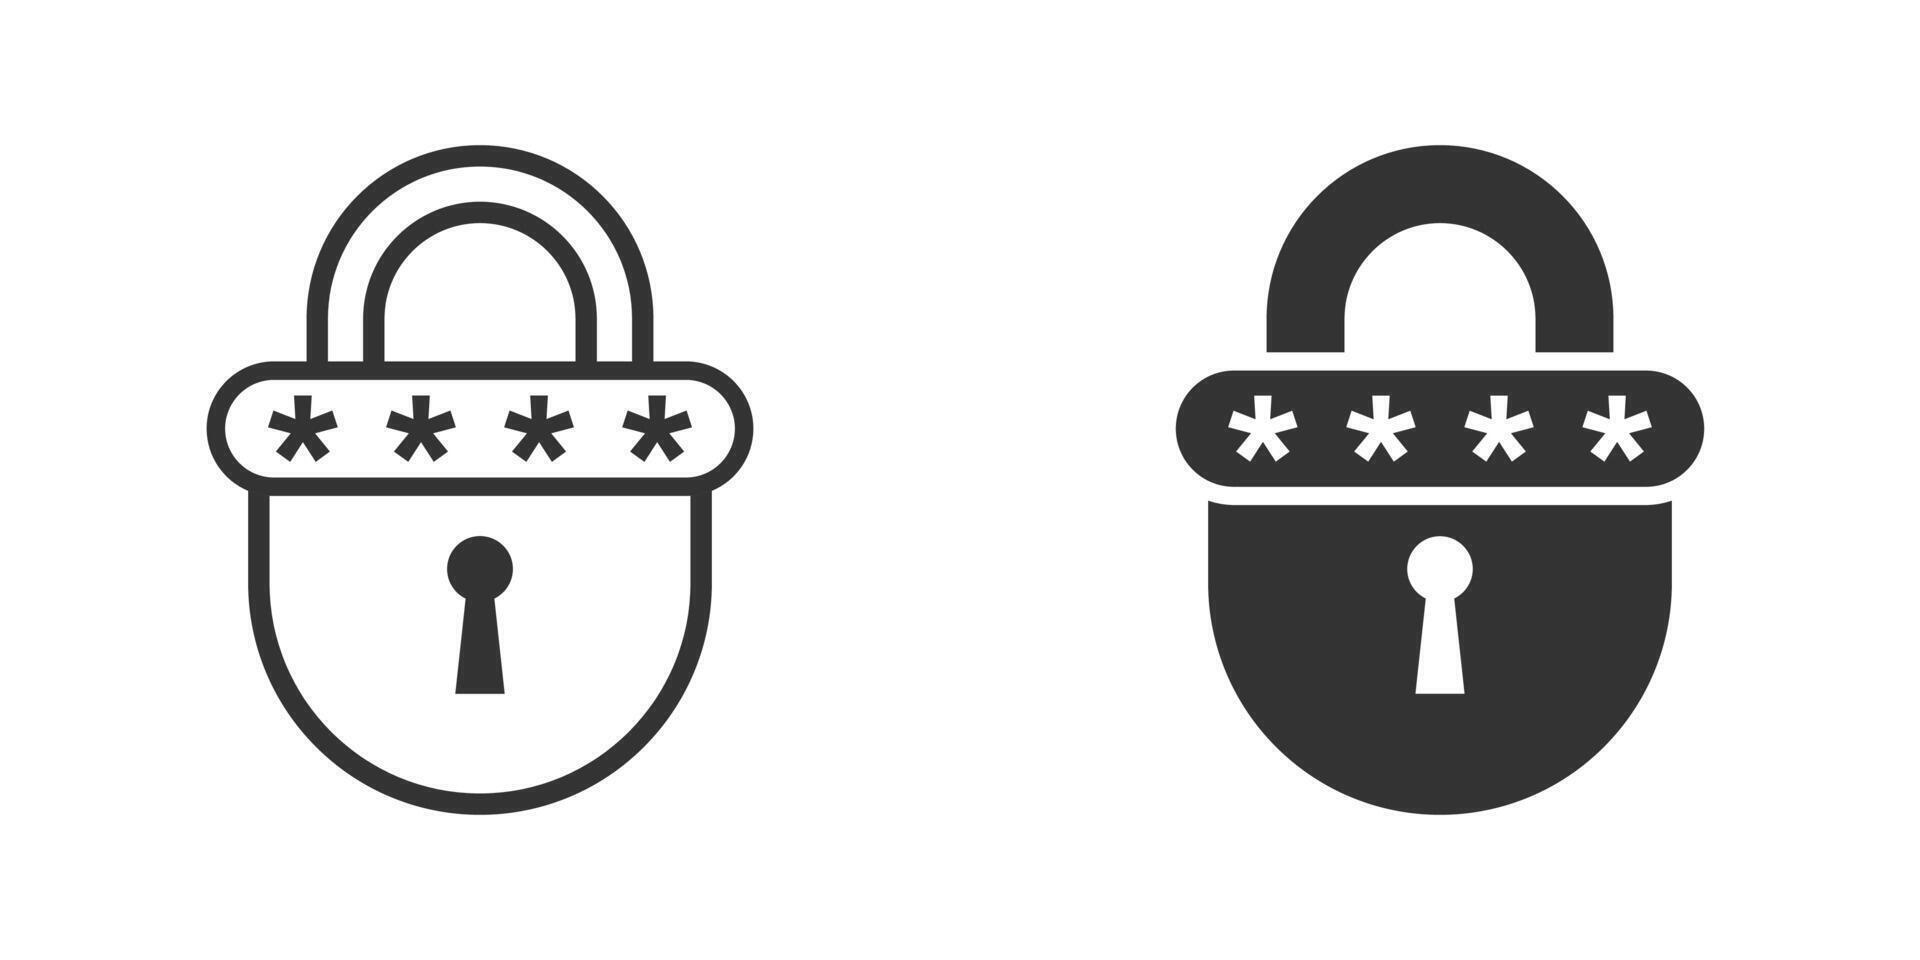 Security password icon. Protection icon. Vector illustration.